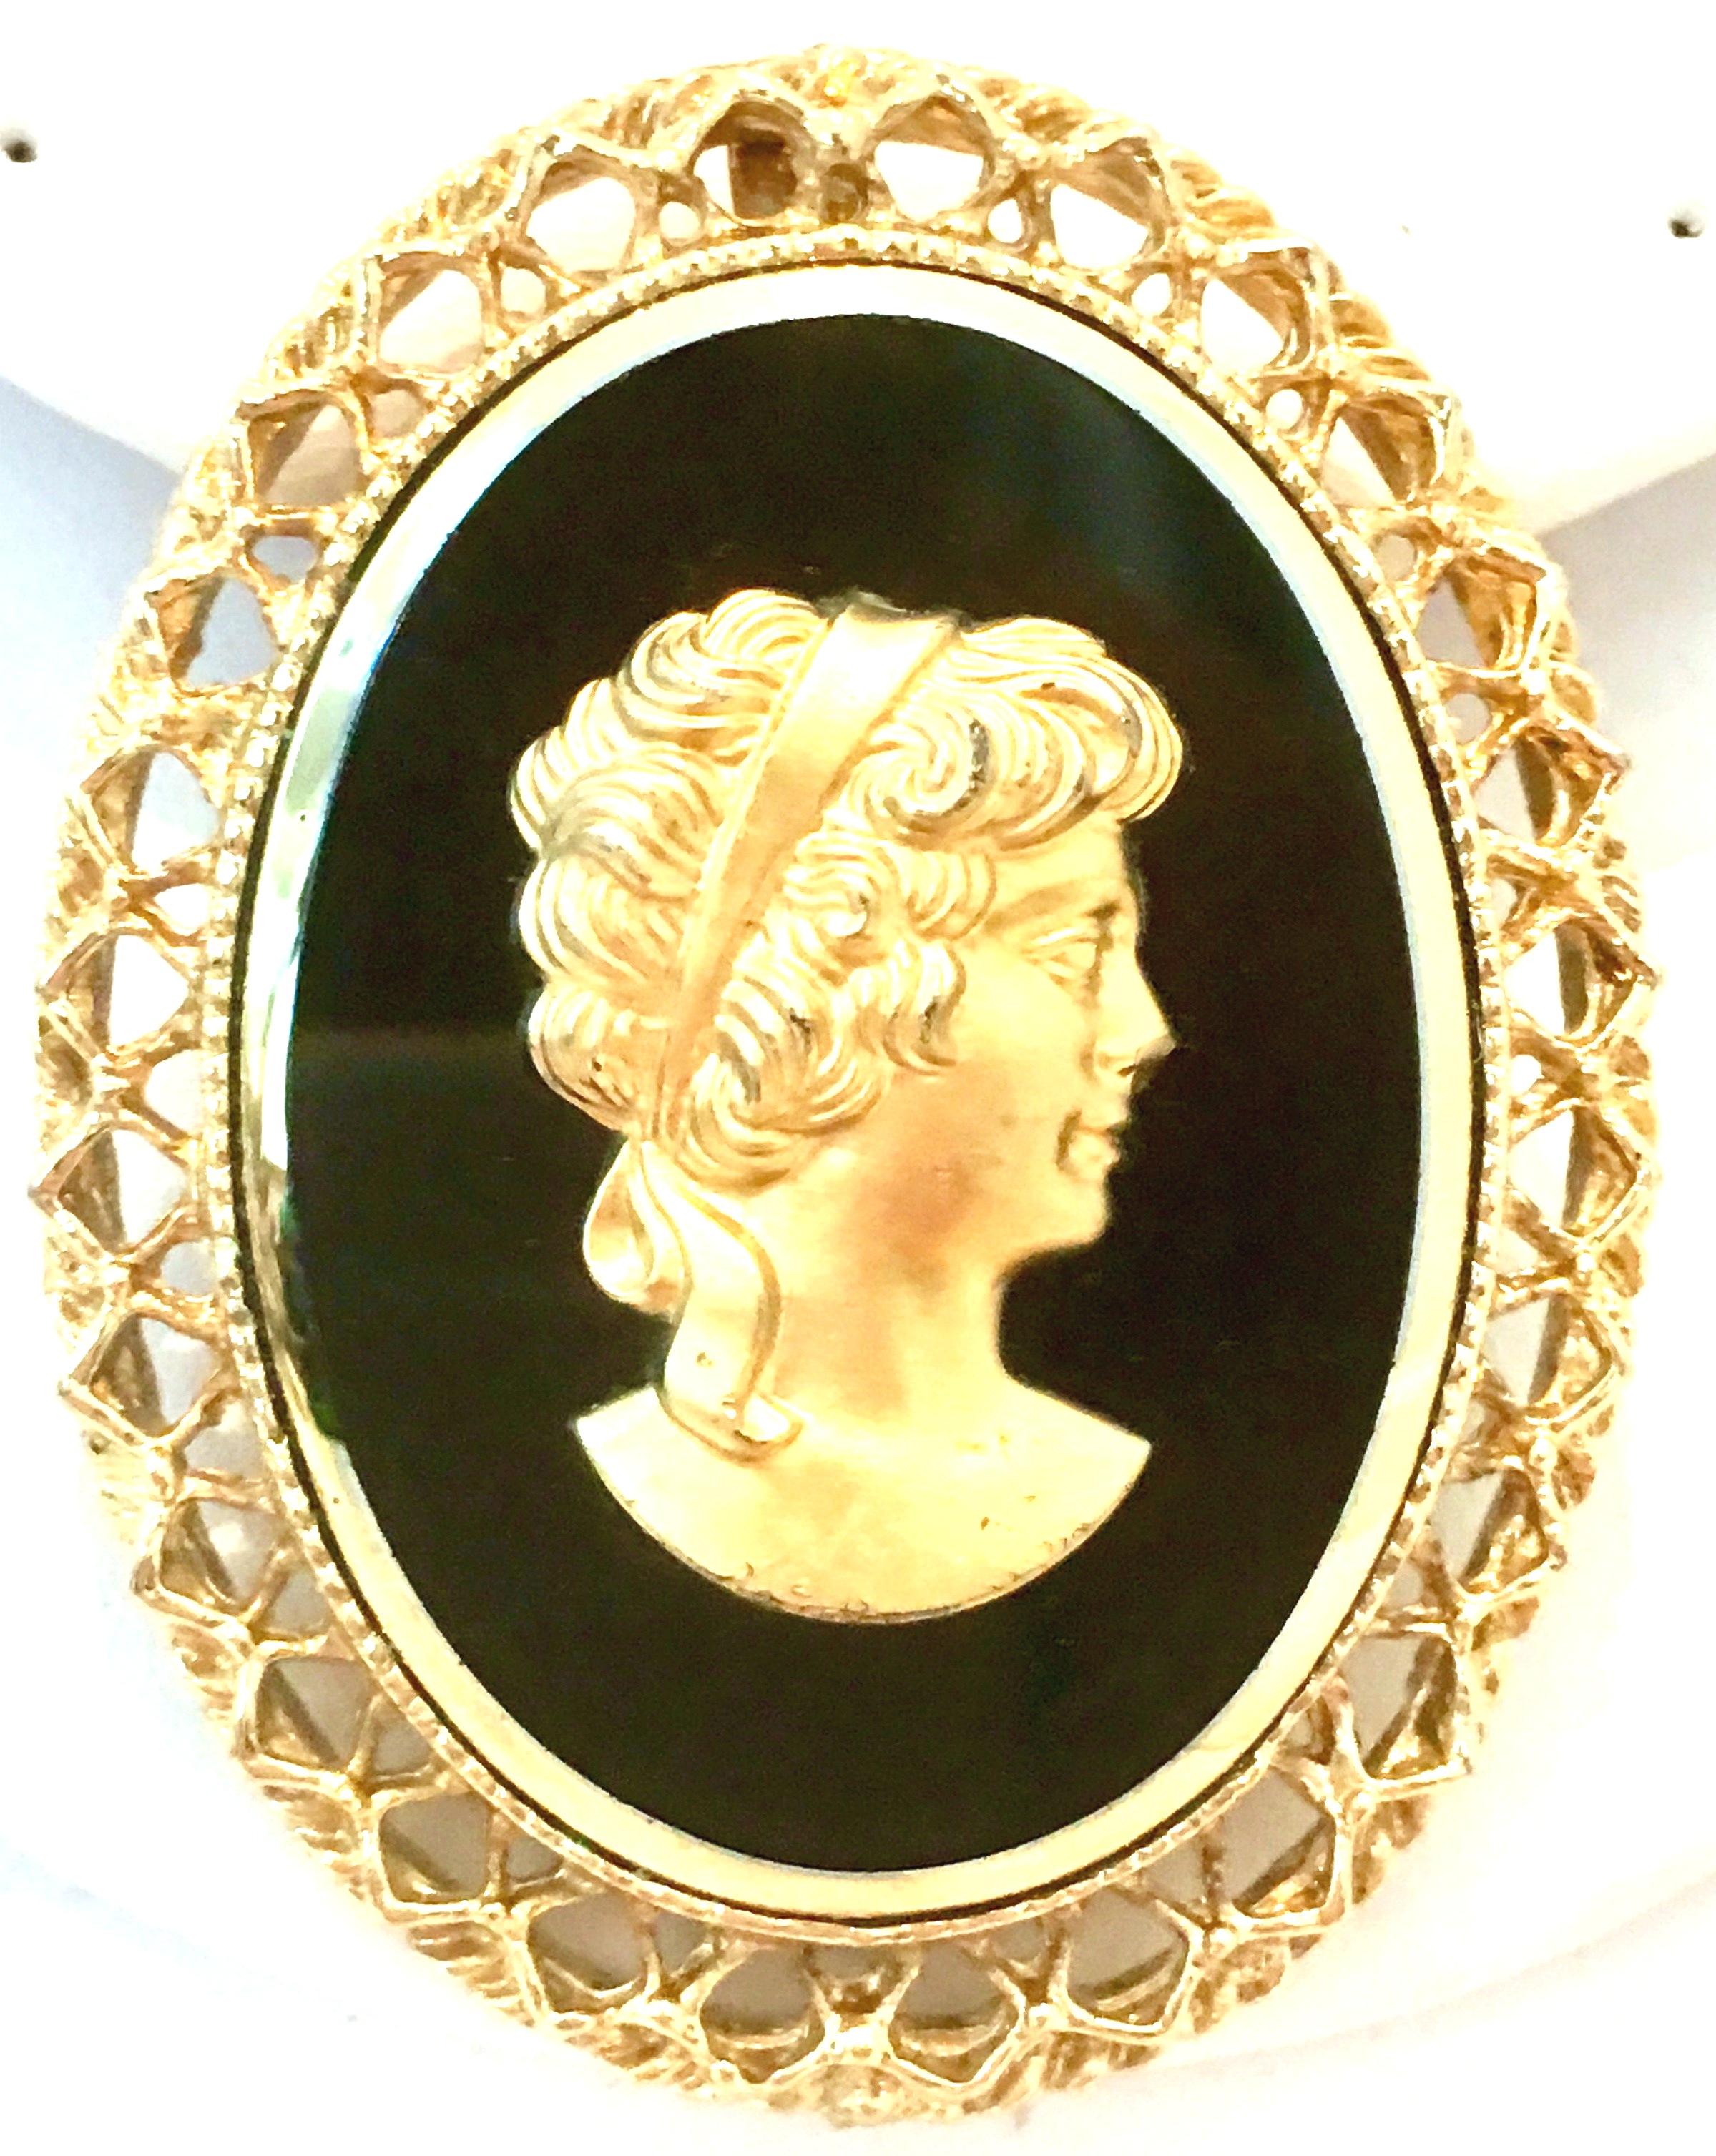 20th Century Gold Plate Cut Glass & Gold High Relief Cameo Brooch & Necklace Slide. This charming right facing woman gold cameo sitting atop a black cut glass bezel set cameo can be used as a pendant necklace enhancer and or a classic brooch. 